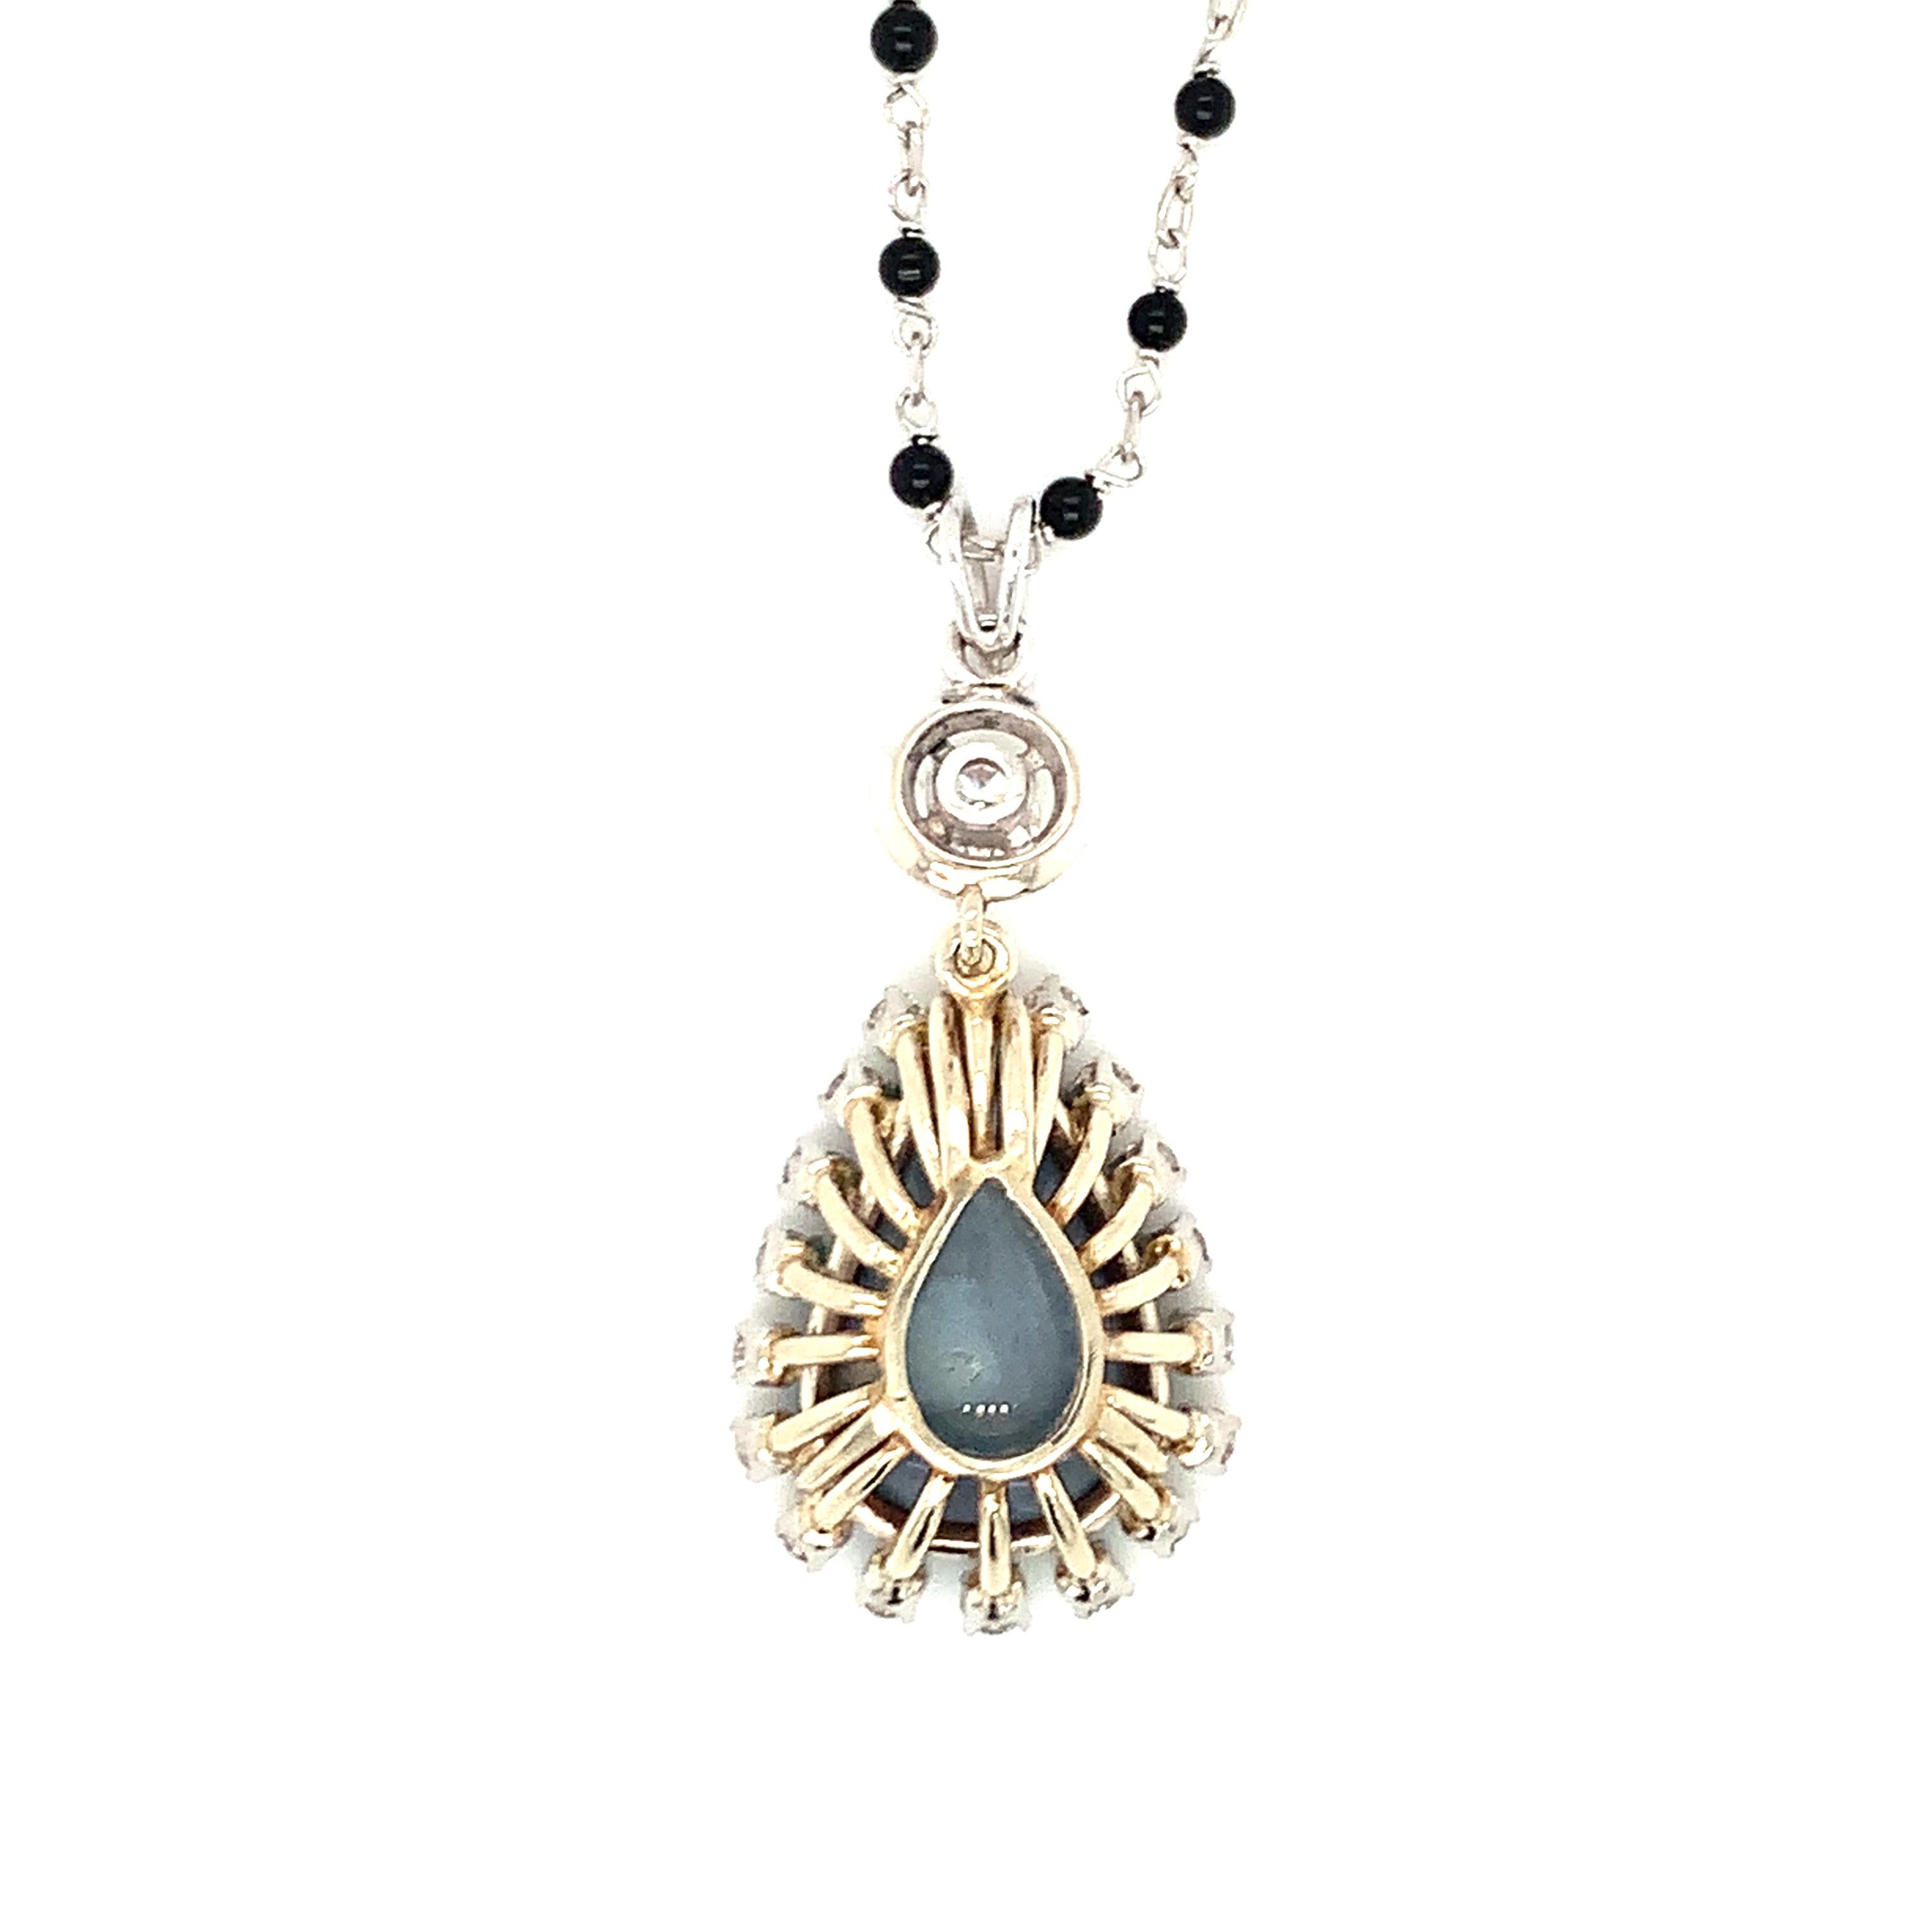 One black opal and diamond 18K white gold pendant centering one pear-shaped cabochon black opal weighing 4.50 ct. with 19 round brilliant cut diamonds weighing 0.80 ct. with I-J color and VS-1 clarity. Attached to an 18K white gold black onyx bead